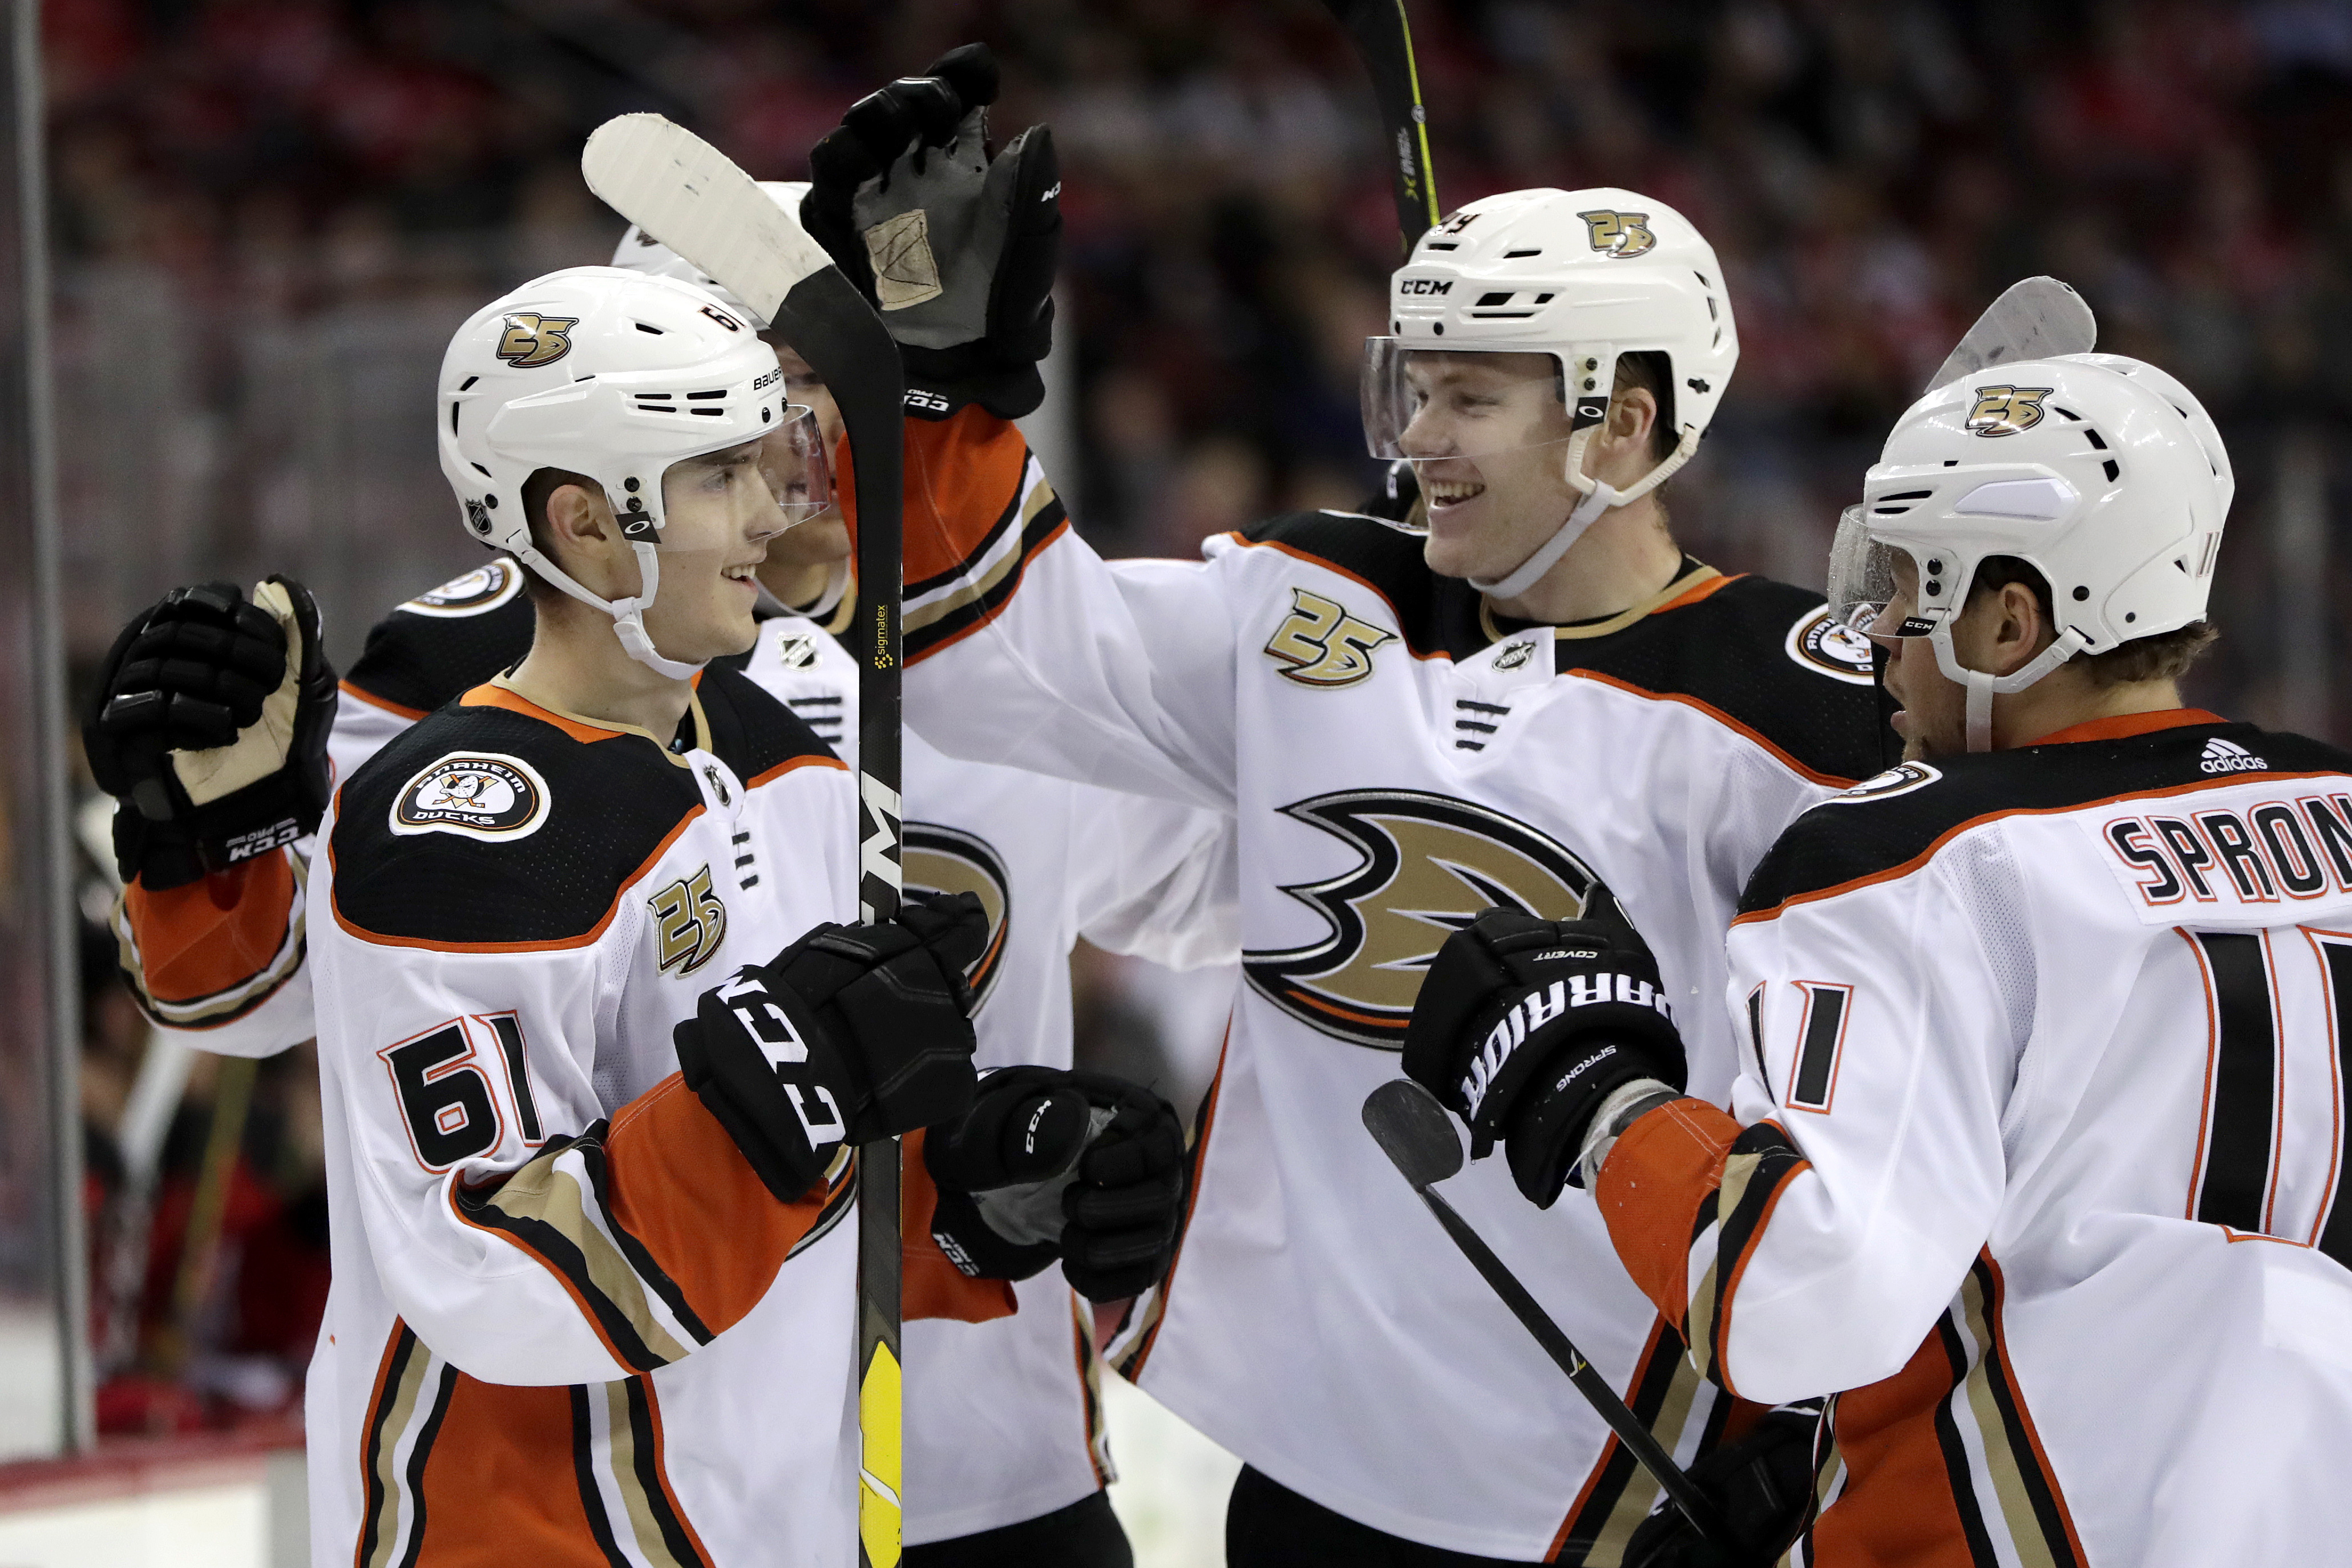 Ducks beat Devils 3-2 for 2nd straight win after record skid